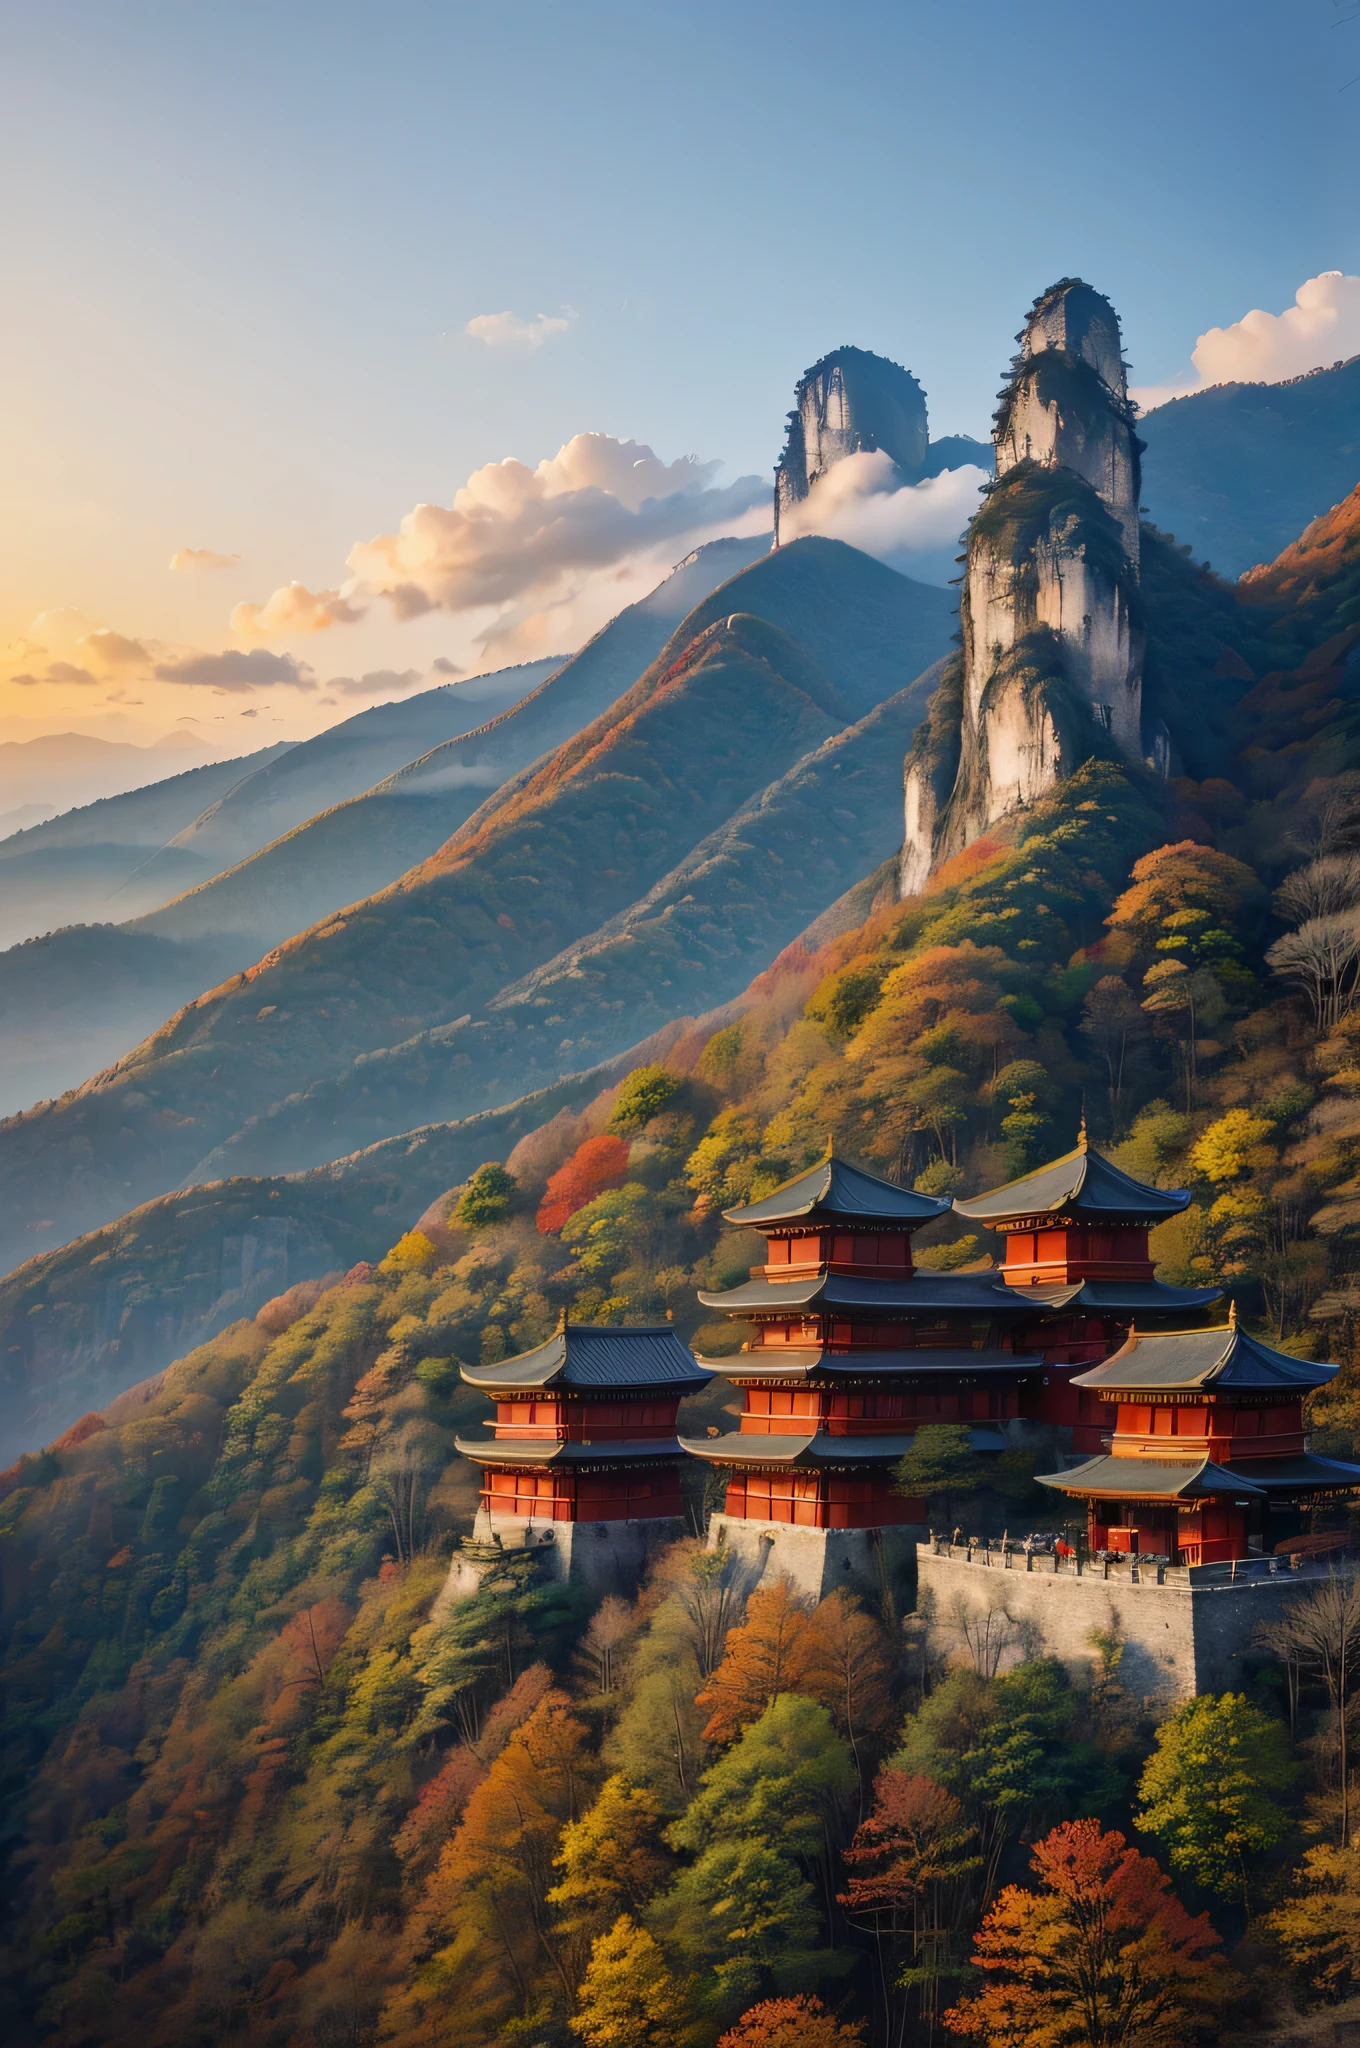 (red small building)([Chinese style, traditional:1.2])Beautiful and detailed architecture,([touching, thrilling:1.2])stunning scenery,([Mountain,Colorful forest:green:1.1])Beautiful sunrise in Zhangjiajie National Forest Park,([painterly, picturesque:1.2])Captured by Liu Haisu,(Raymond Han:1.1)of paintings,([majestic, awe-inspiring:1.1])Mountain,([floating, ethereal:1.1])unbelievable beautiful,([Enchanting, enchanting:1.2])Created by Ren Xiong.